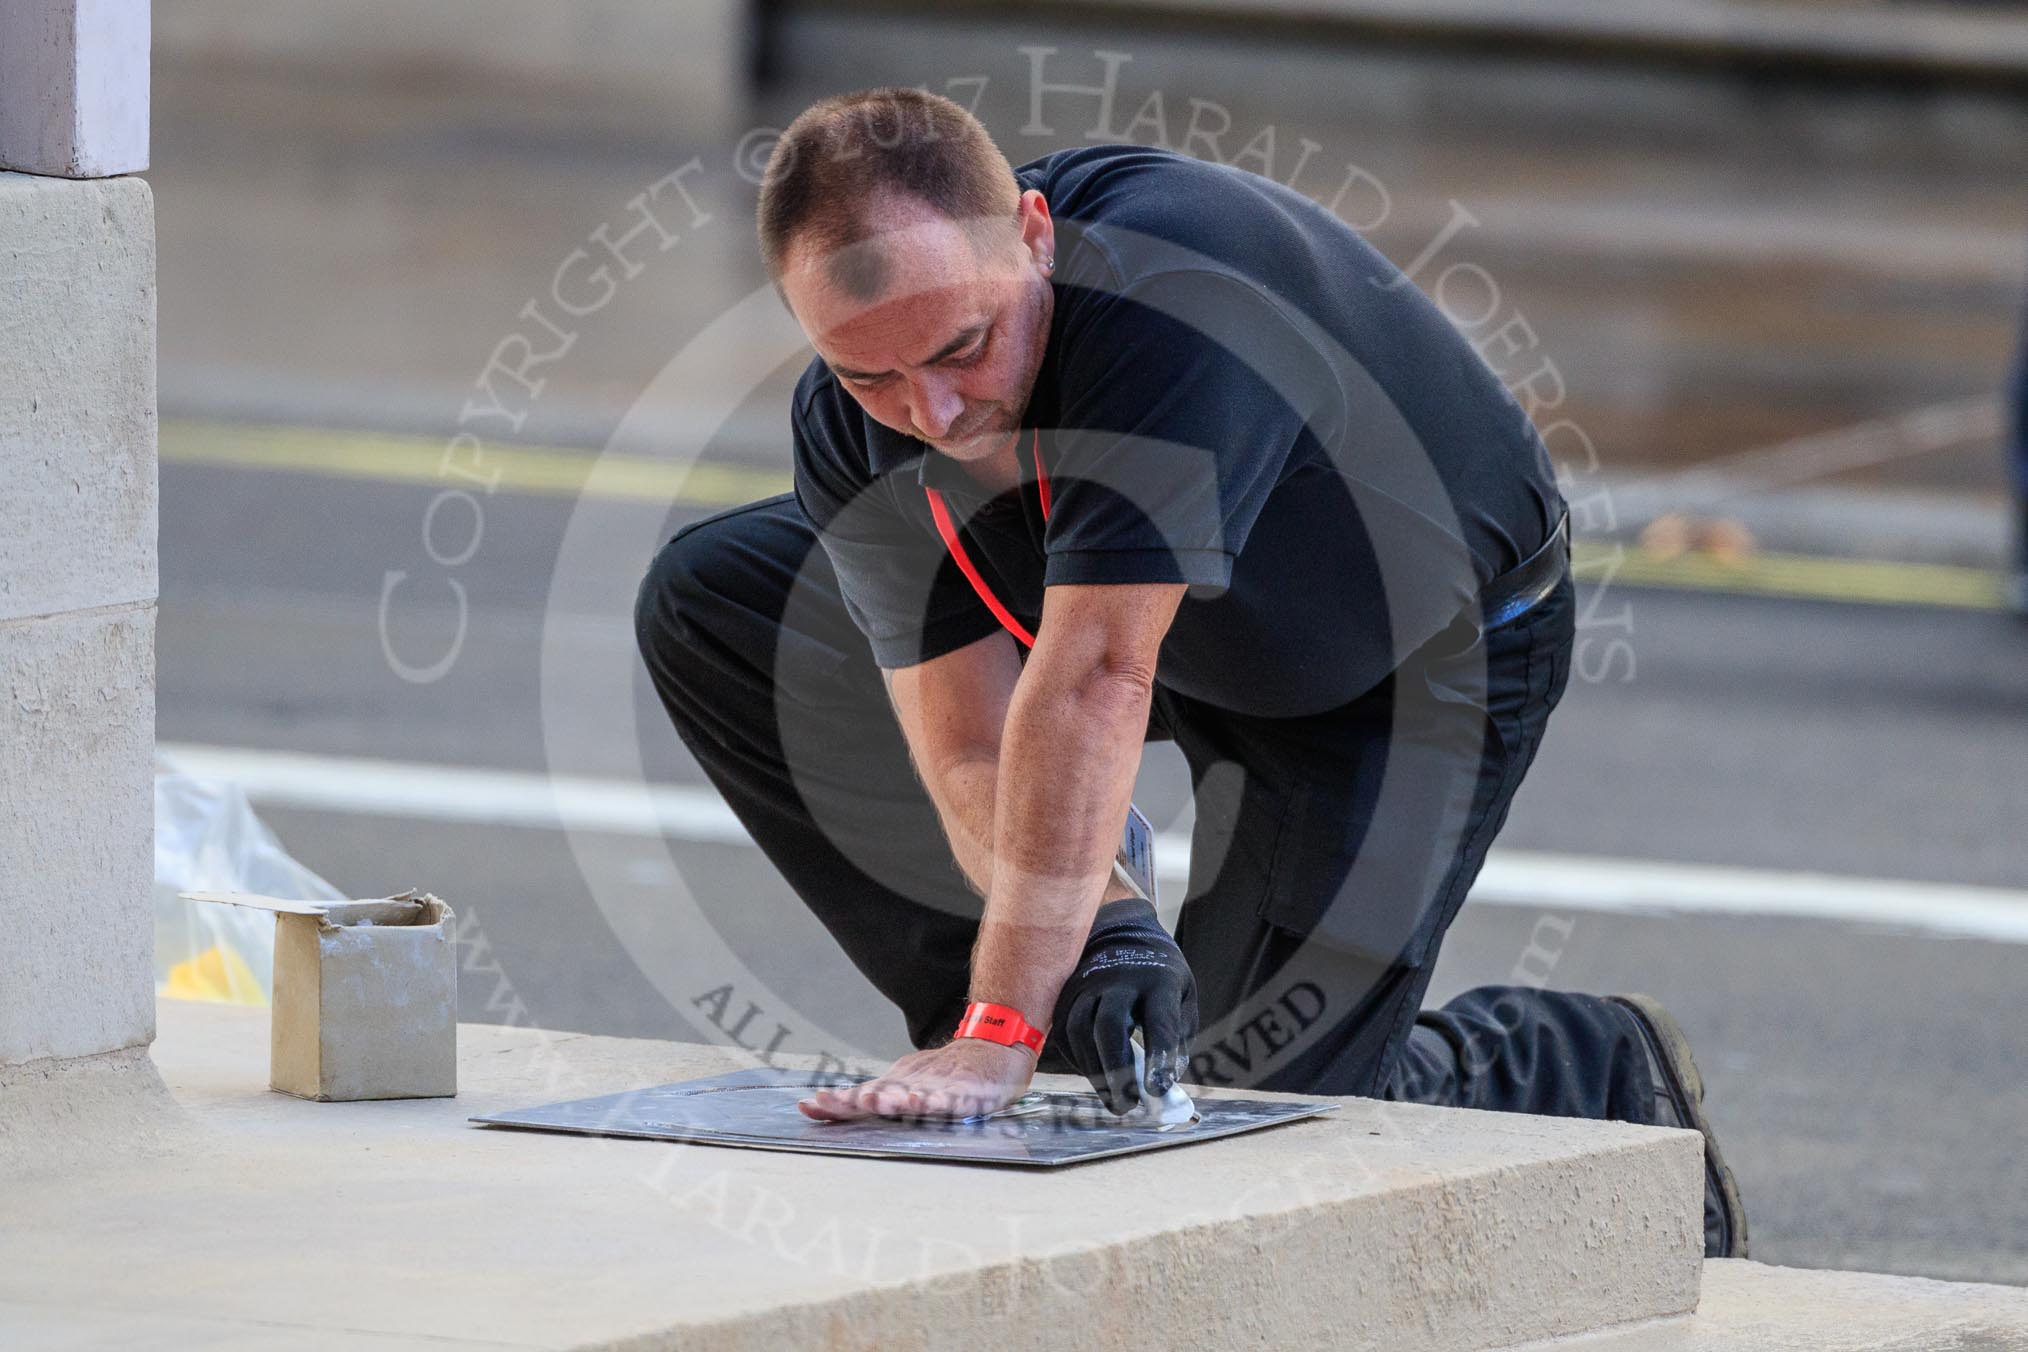 An Foreign and Commonwealth Office workman marking the position where the wreaths are to be laid around the Cenotaph before the Remembrance Sunday Cenotaph Ceremony 2018 at Horse Guards Parade, Westminster, London, 11 November 2018, 08:52.